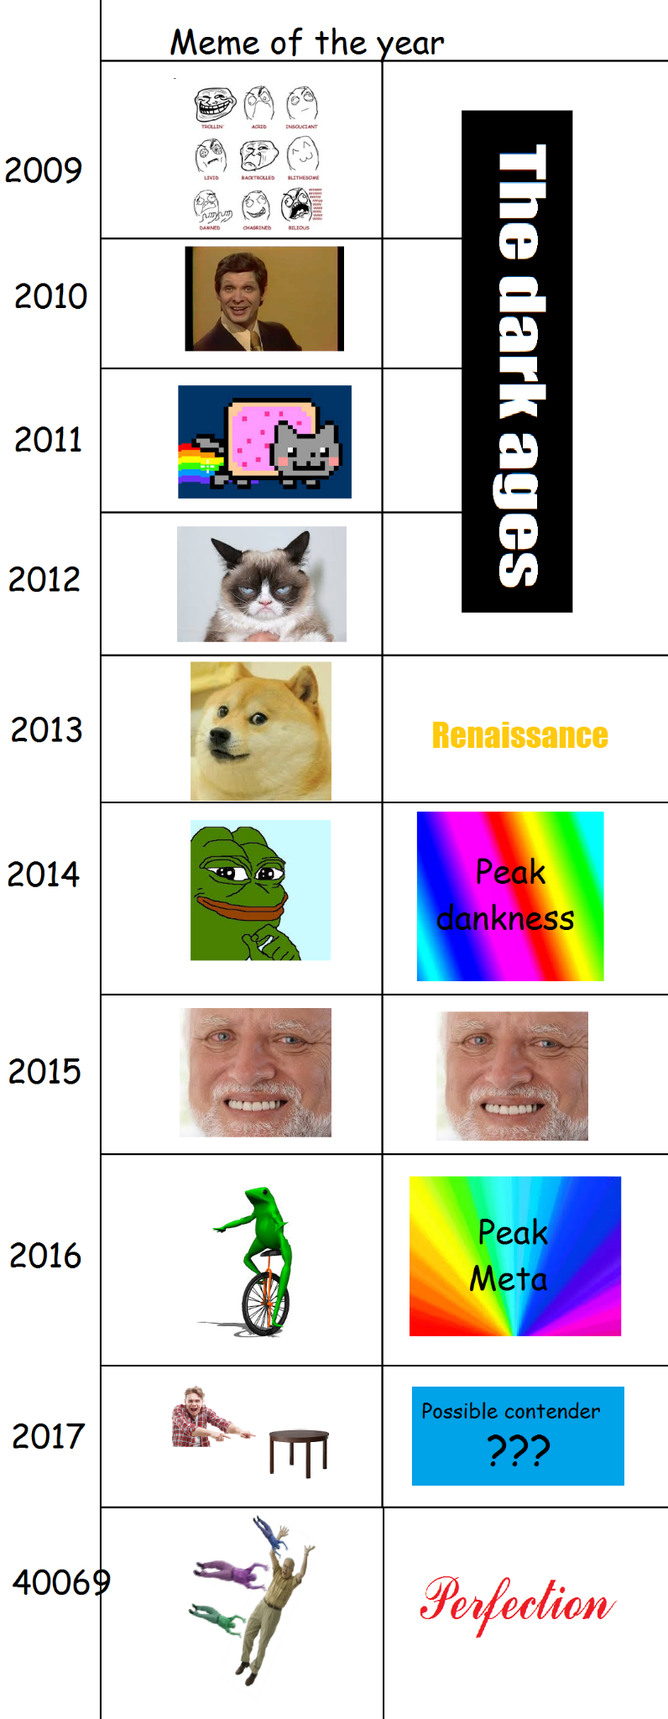 What will the future bring - meme